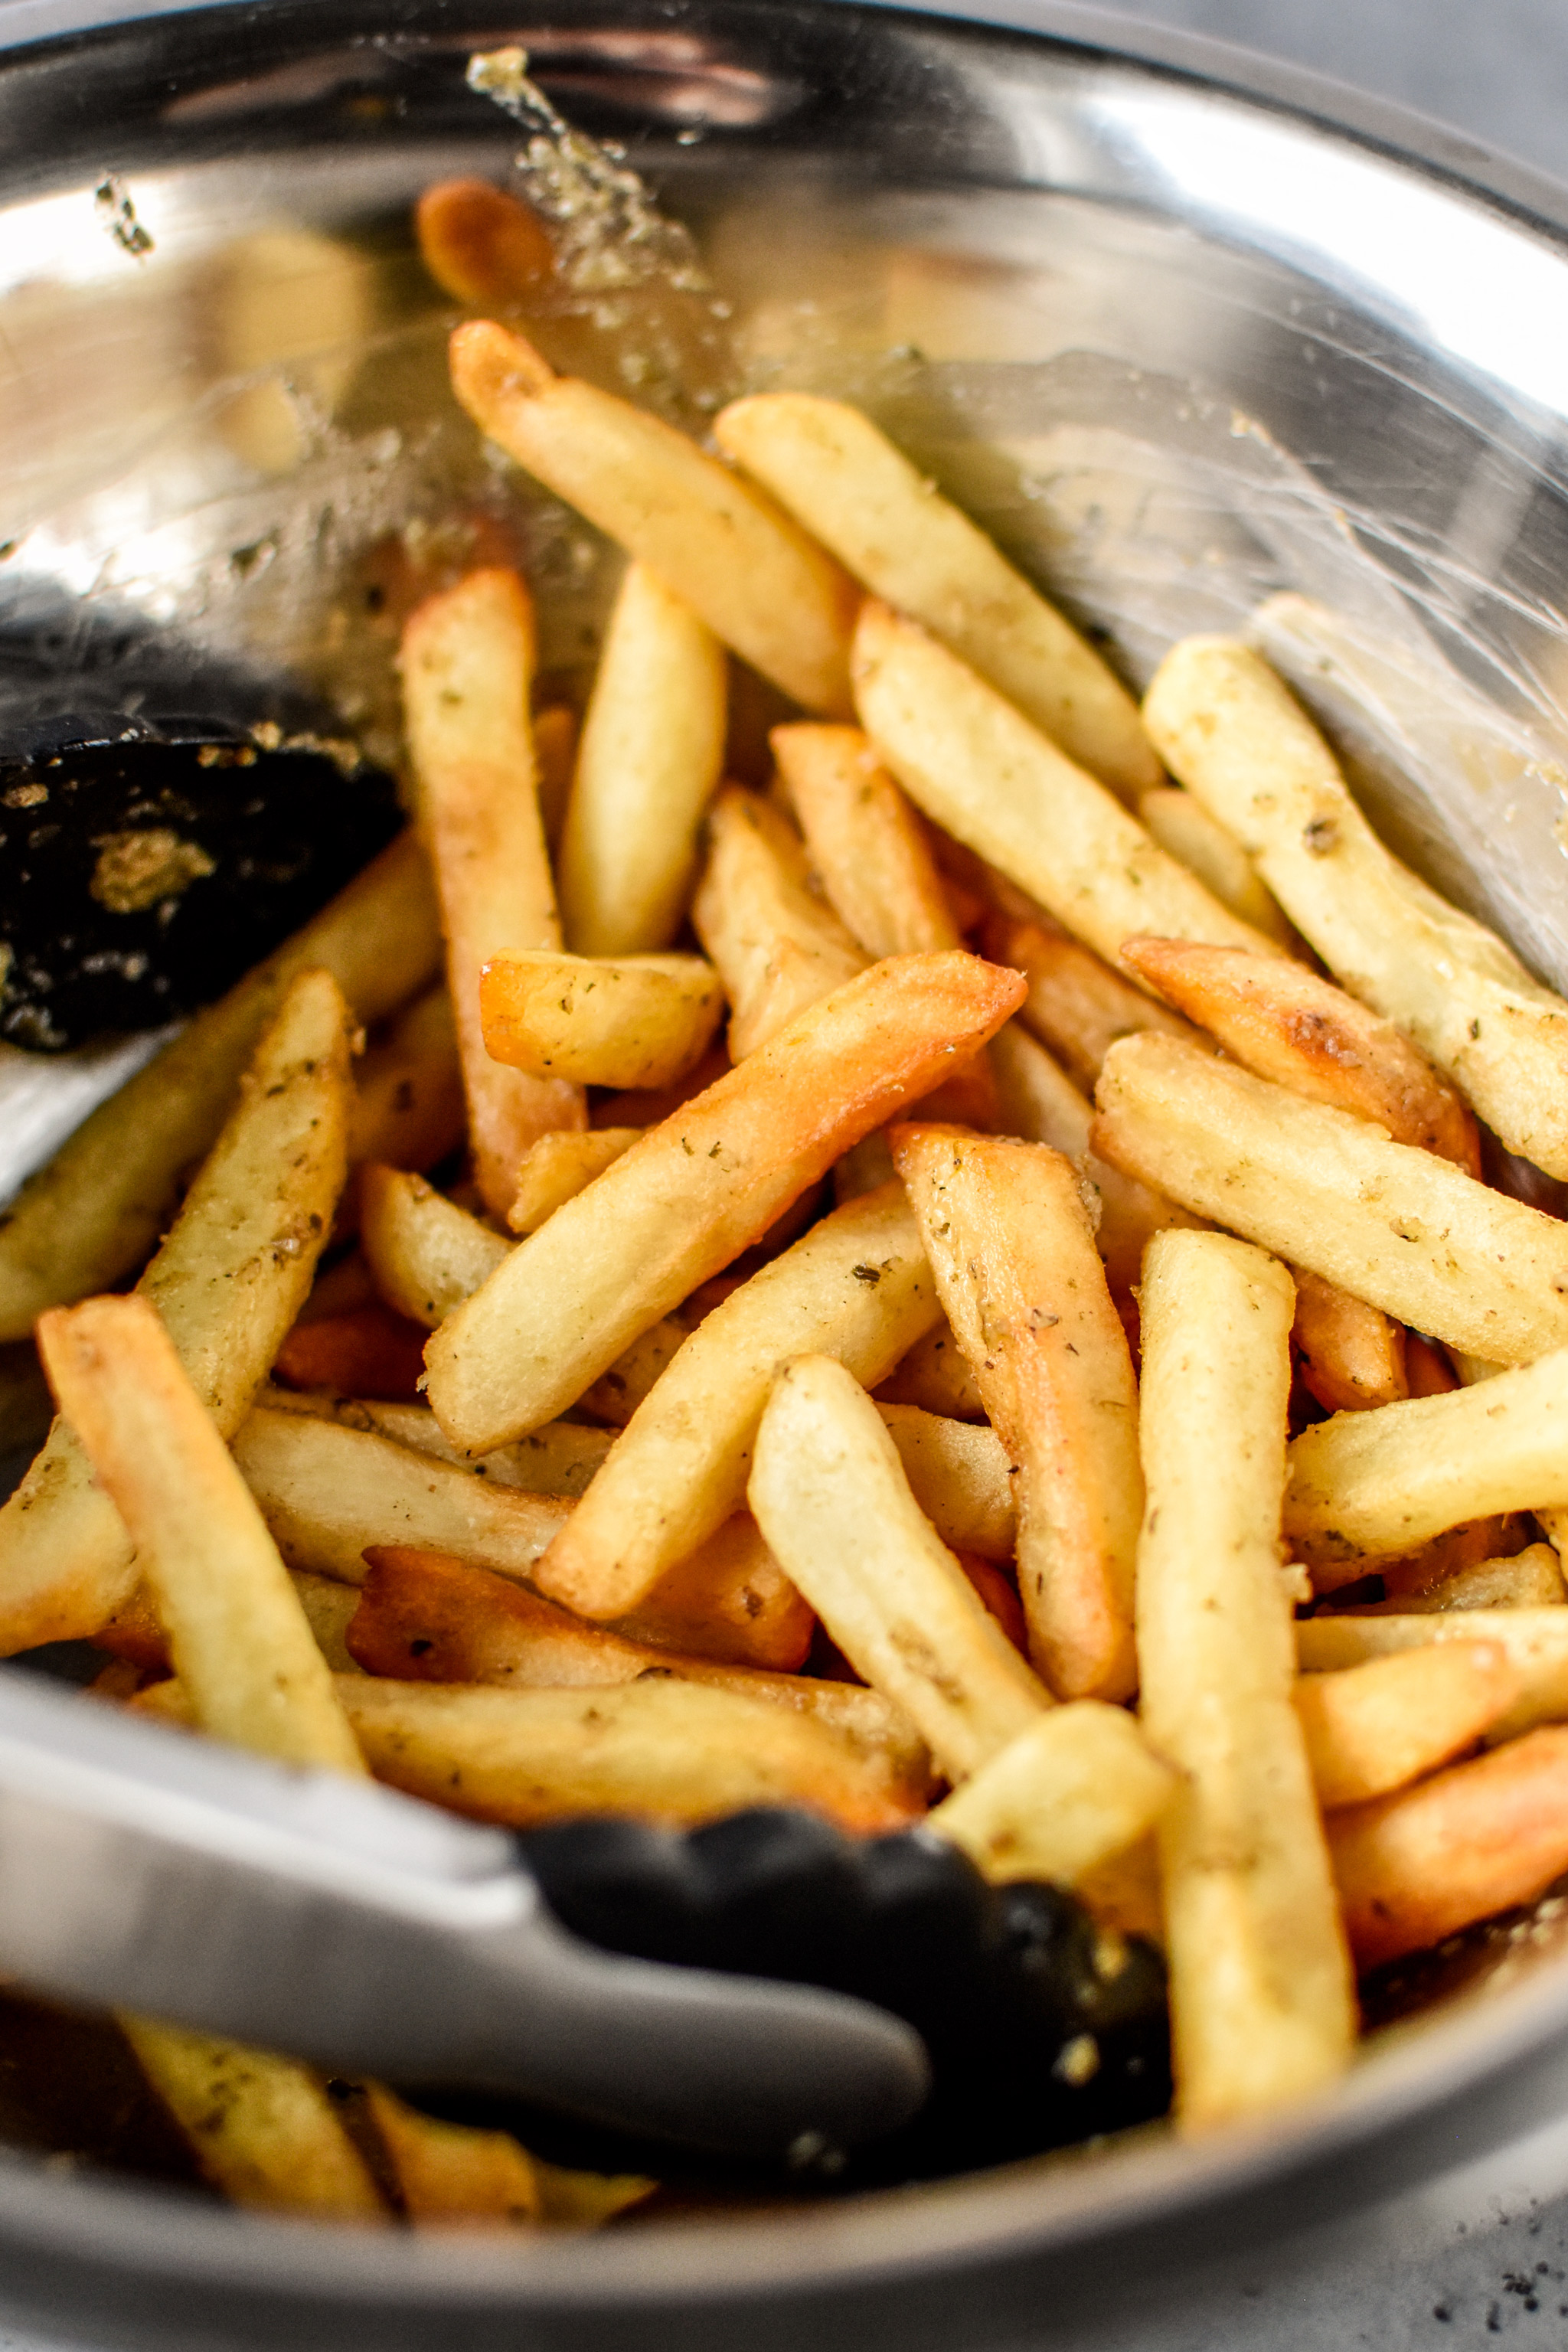 Garlic fries from Trader Joe's made in the air fryer to golden brown perfection!